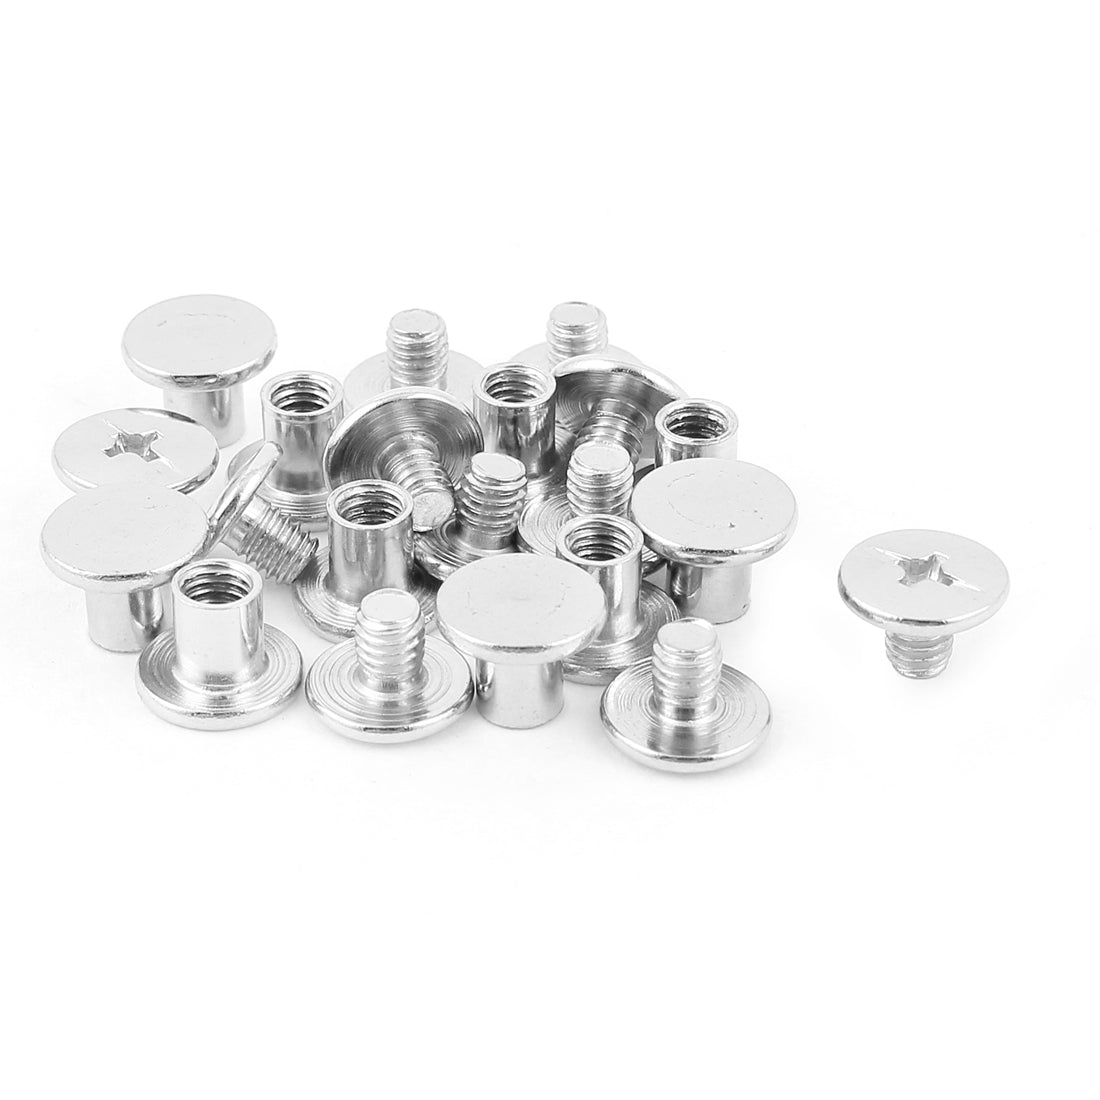 uxcell Uxcell 10pcs 5mmx6mm Nickel Plated Binding Chicago Screw Post for Album Scrapbook